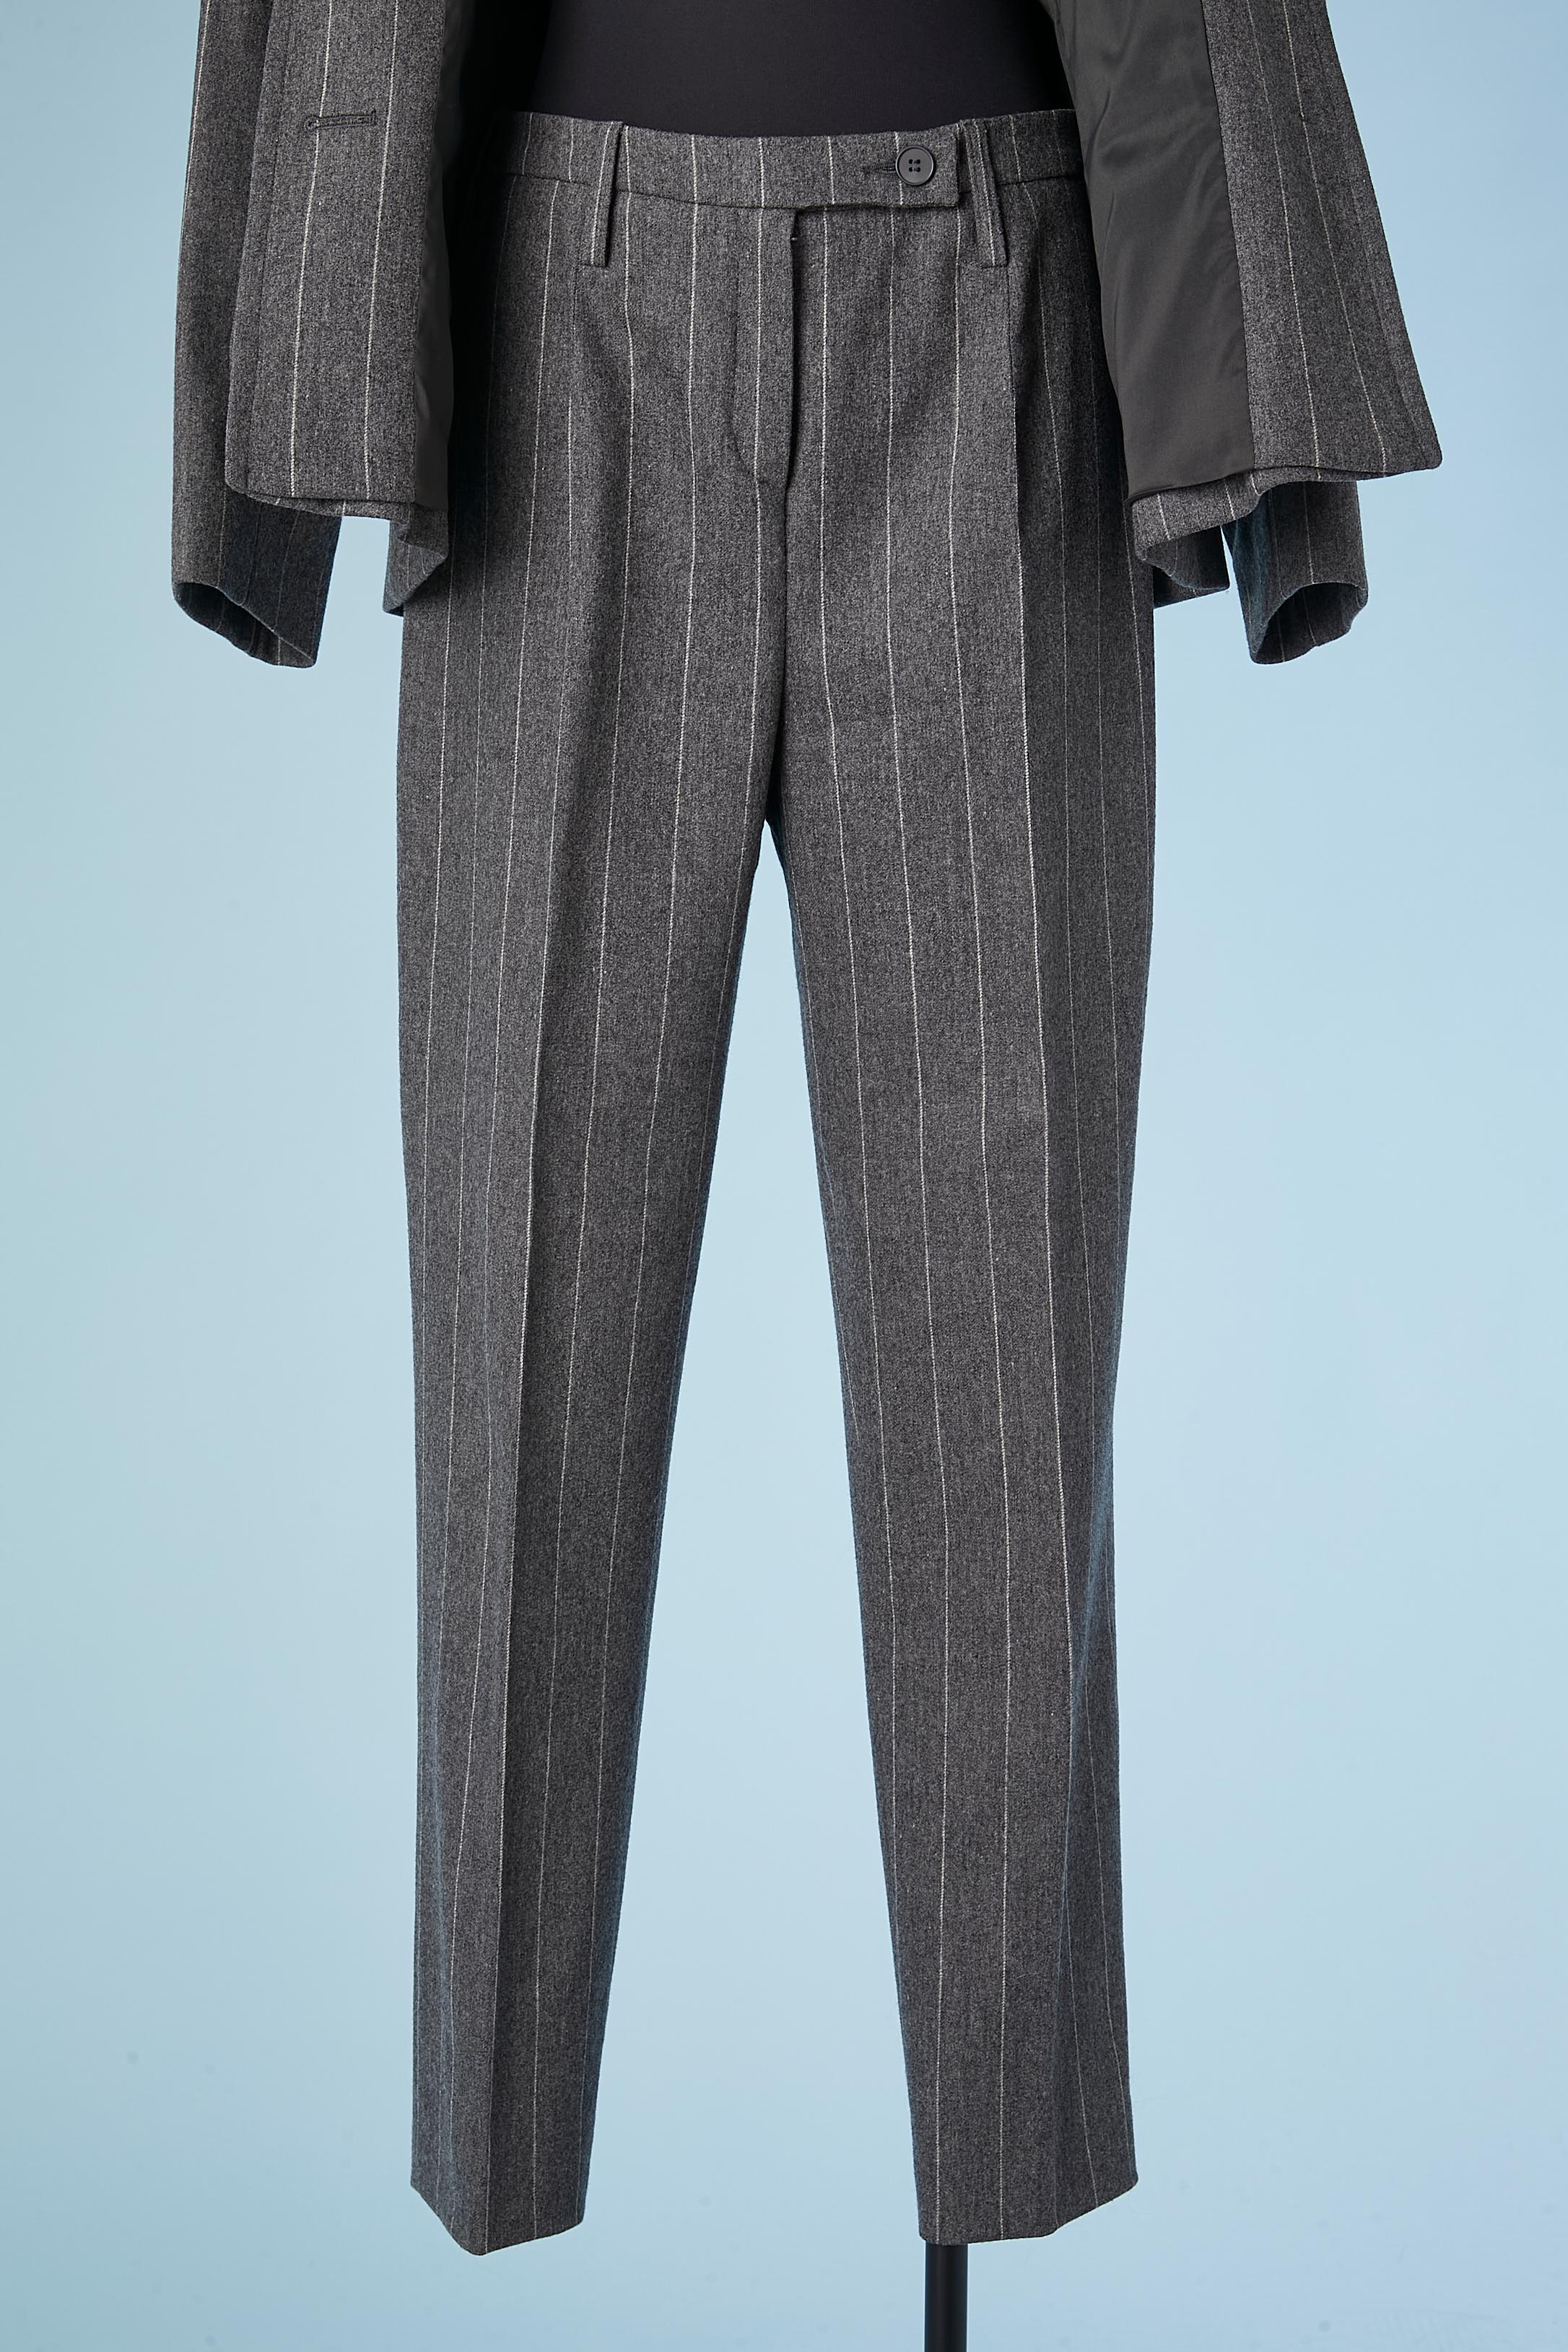 Grey pinstripes trouser suit in wool Yves Saint Laurent Variation  For Sale 2